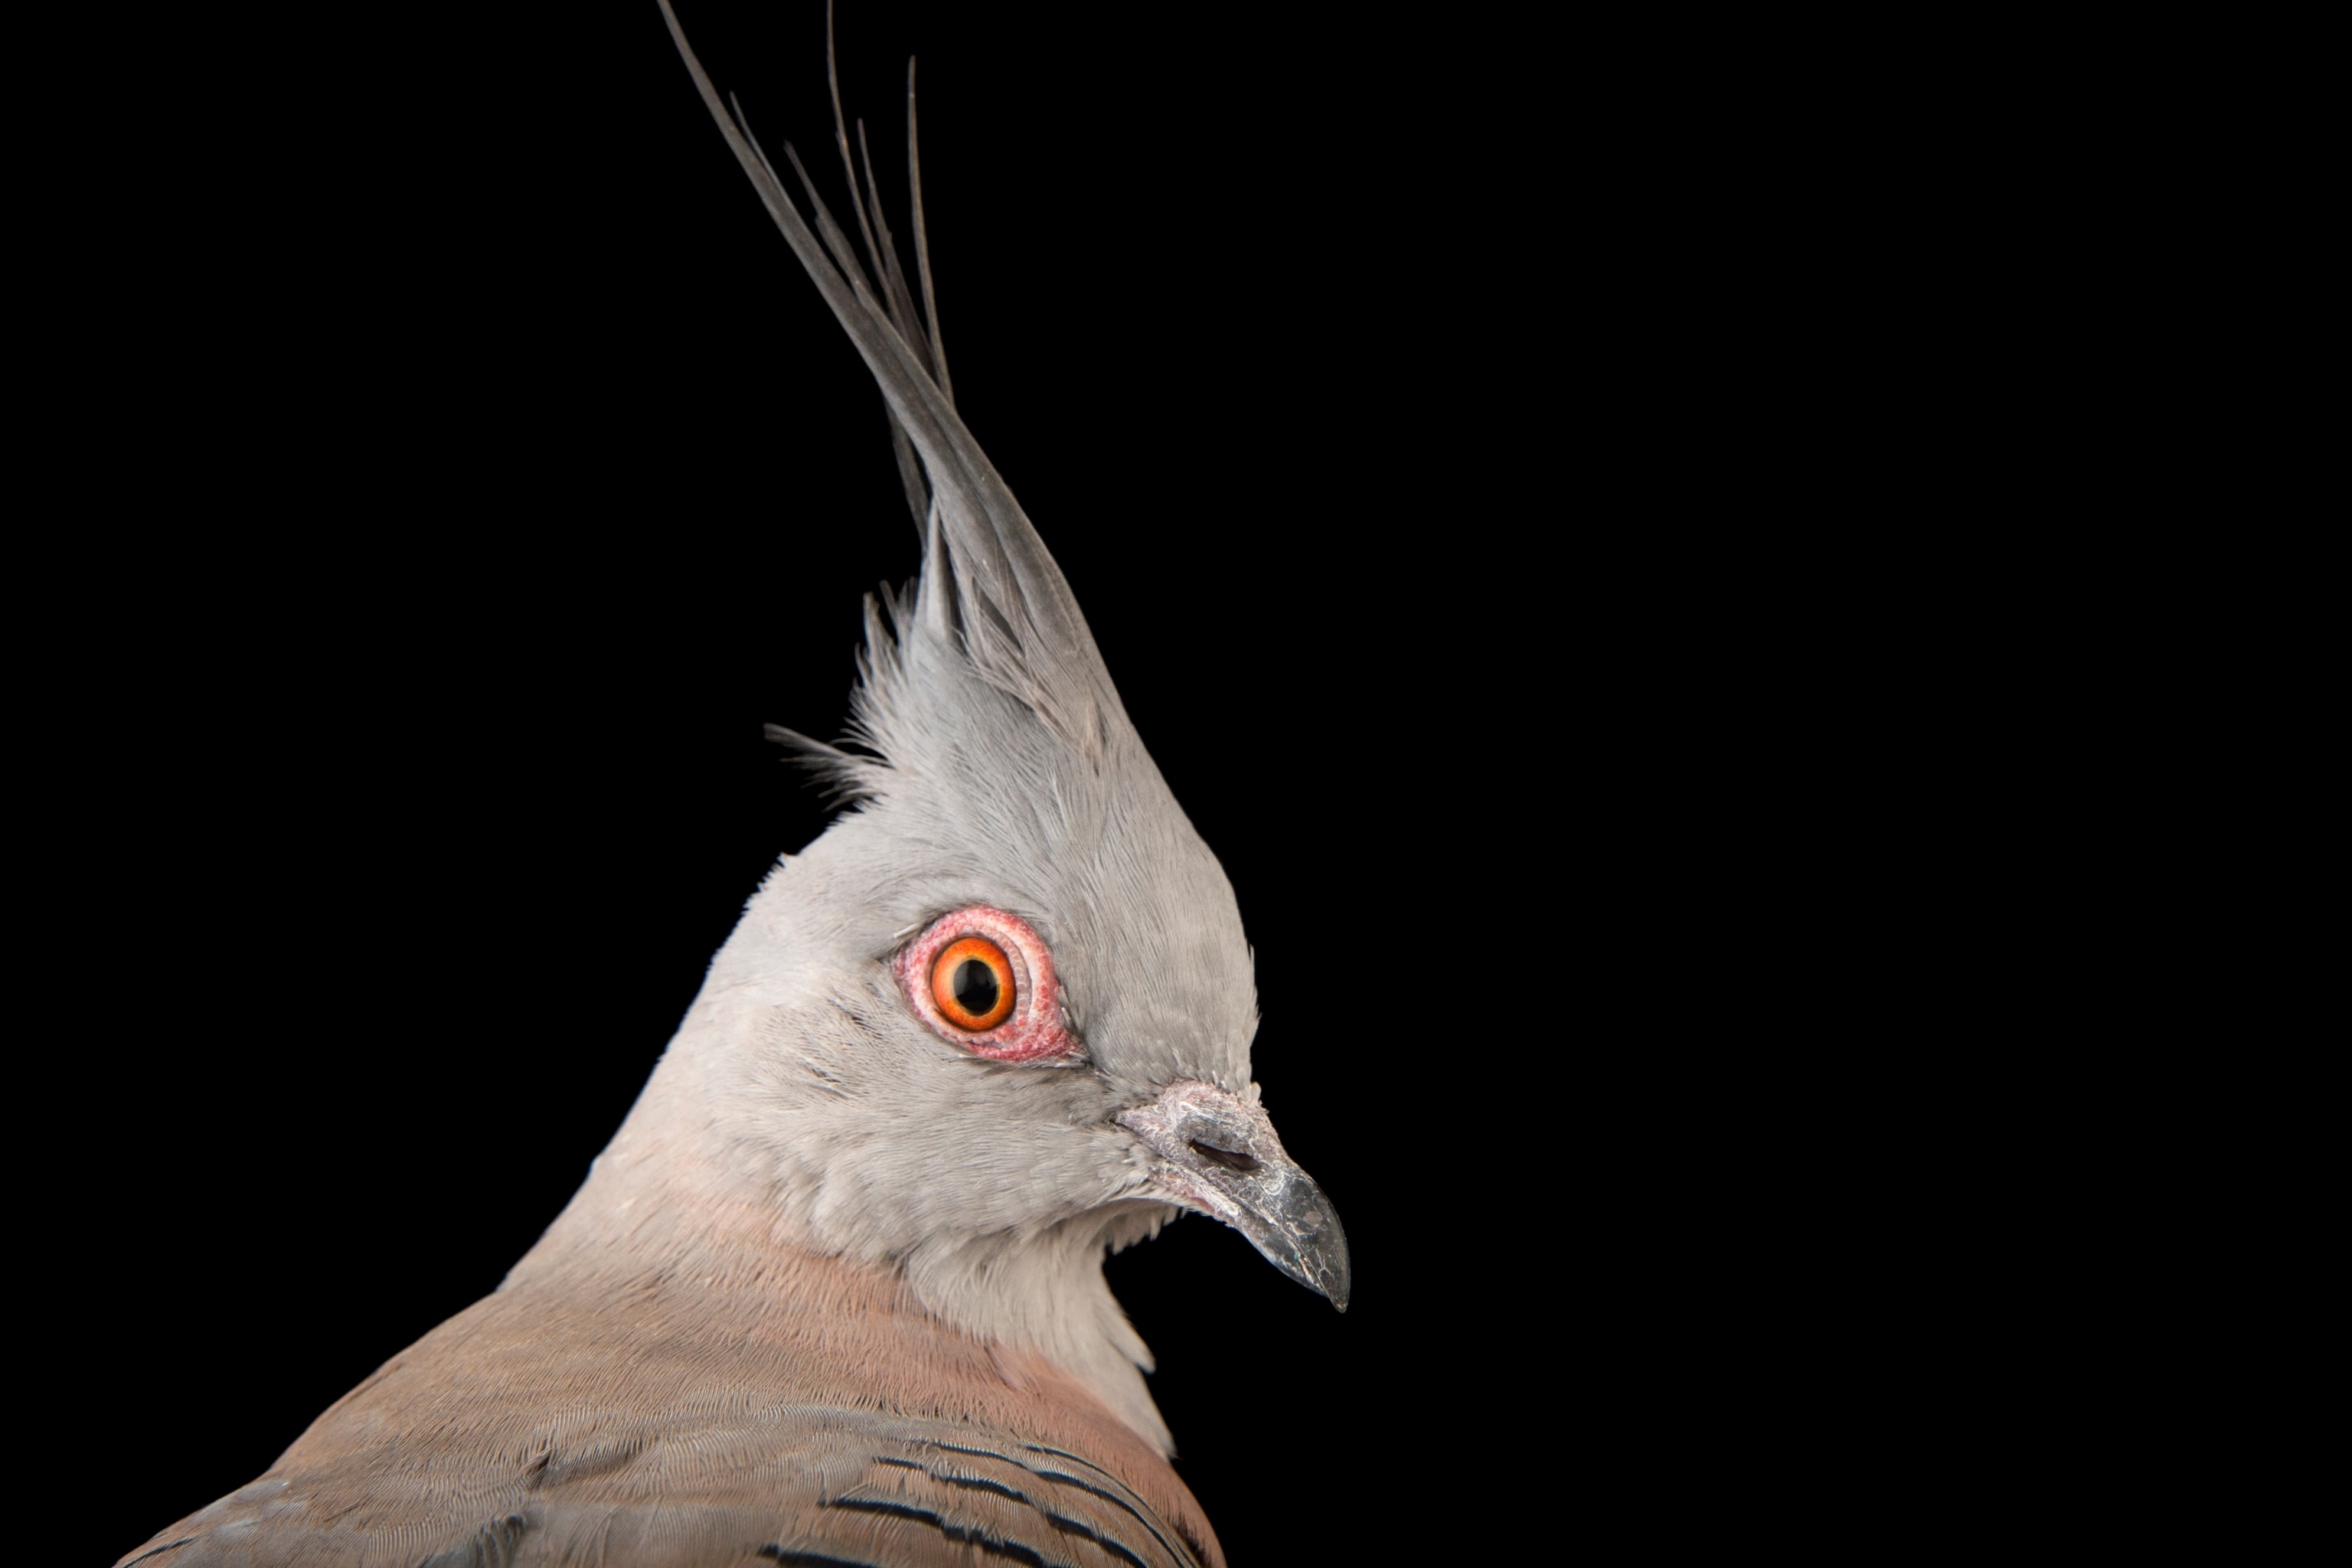 Studio photograph of a crested pigeon